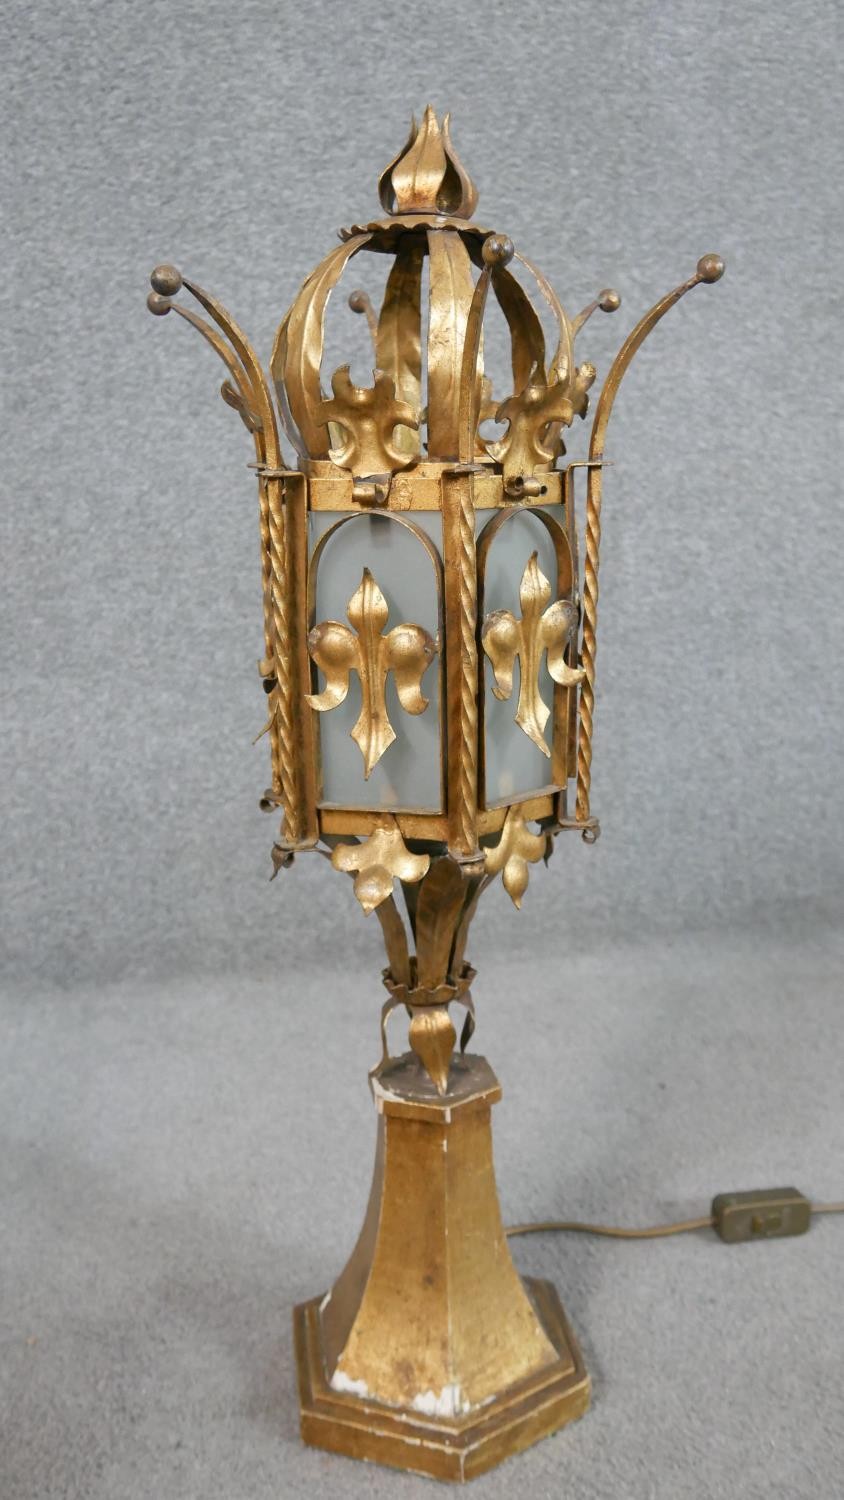 A pair of gilt metal lamps, believed to be Venetian gondola lanterns, of hexagonal section with - Image 7 of 7